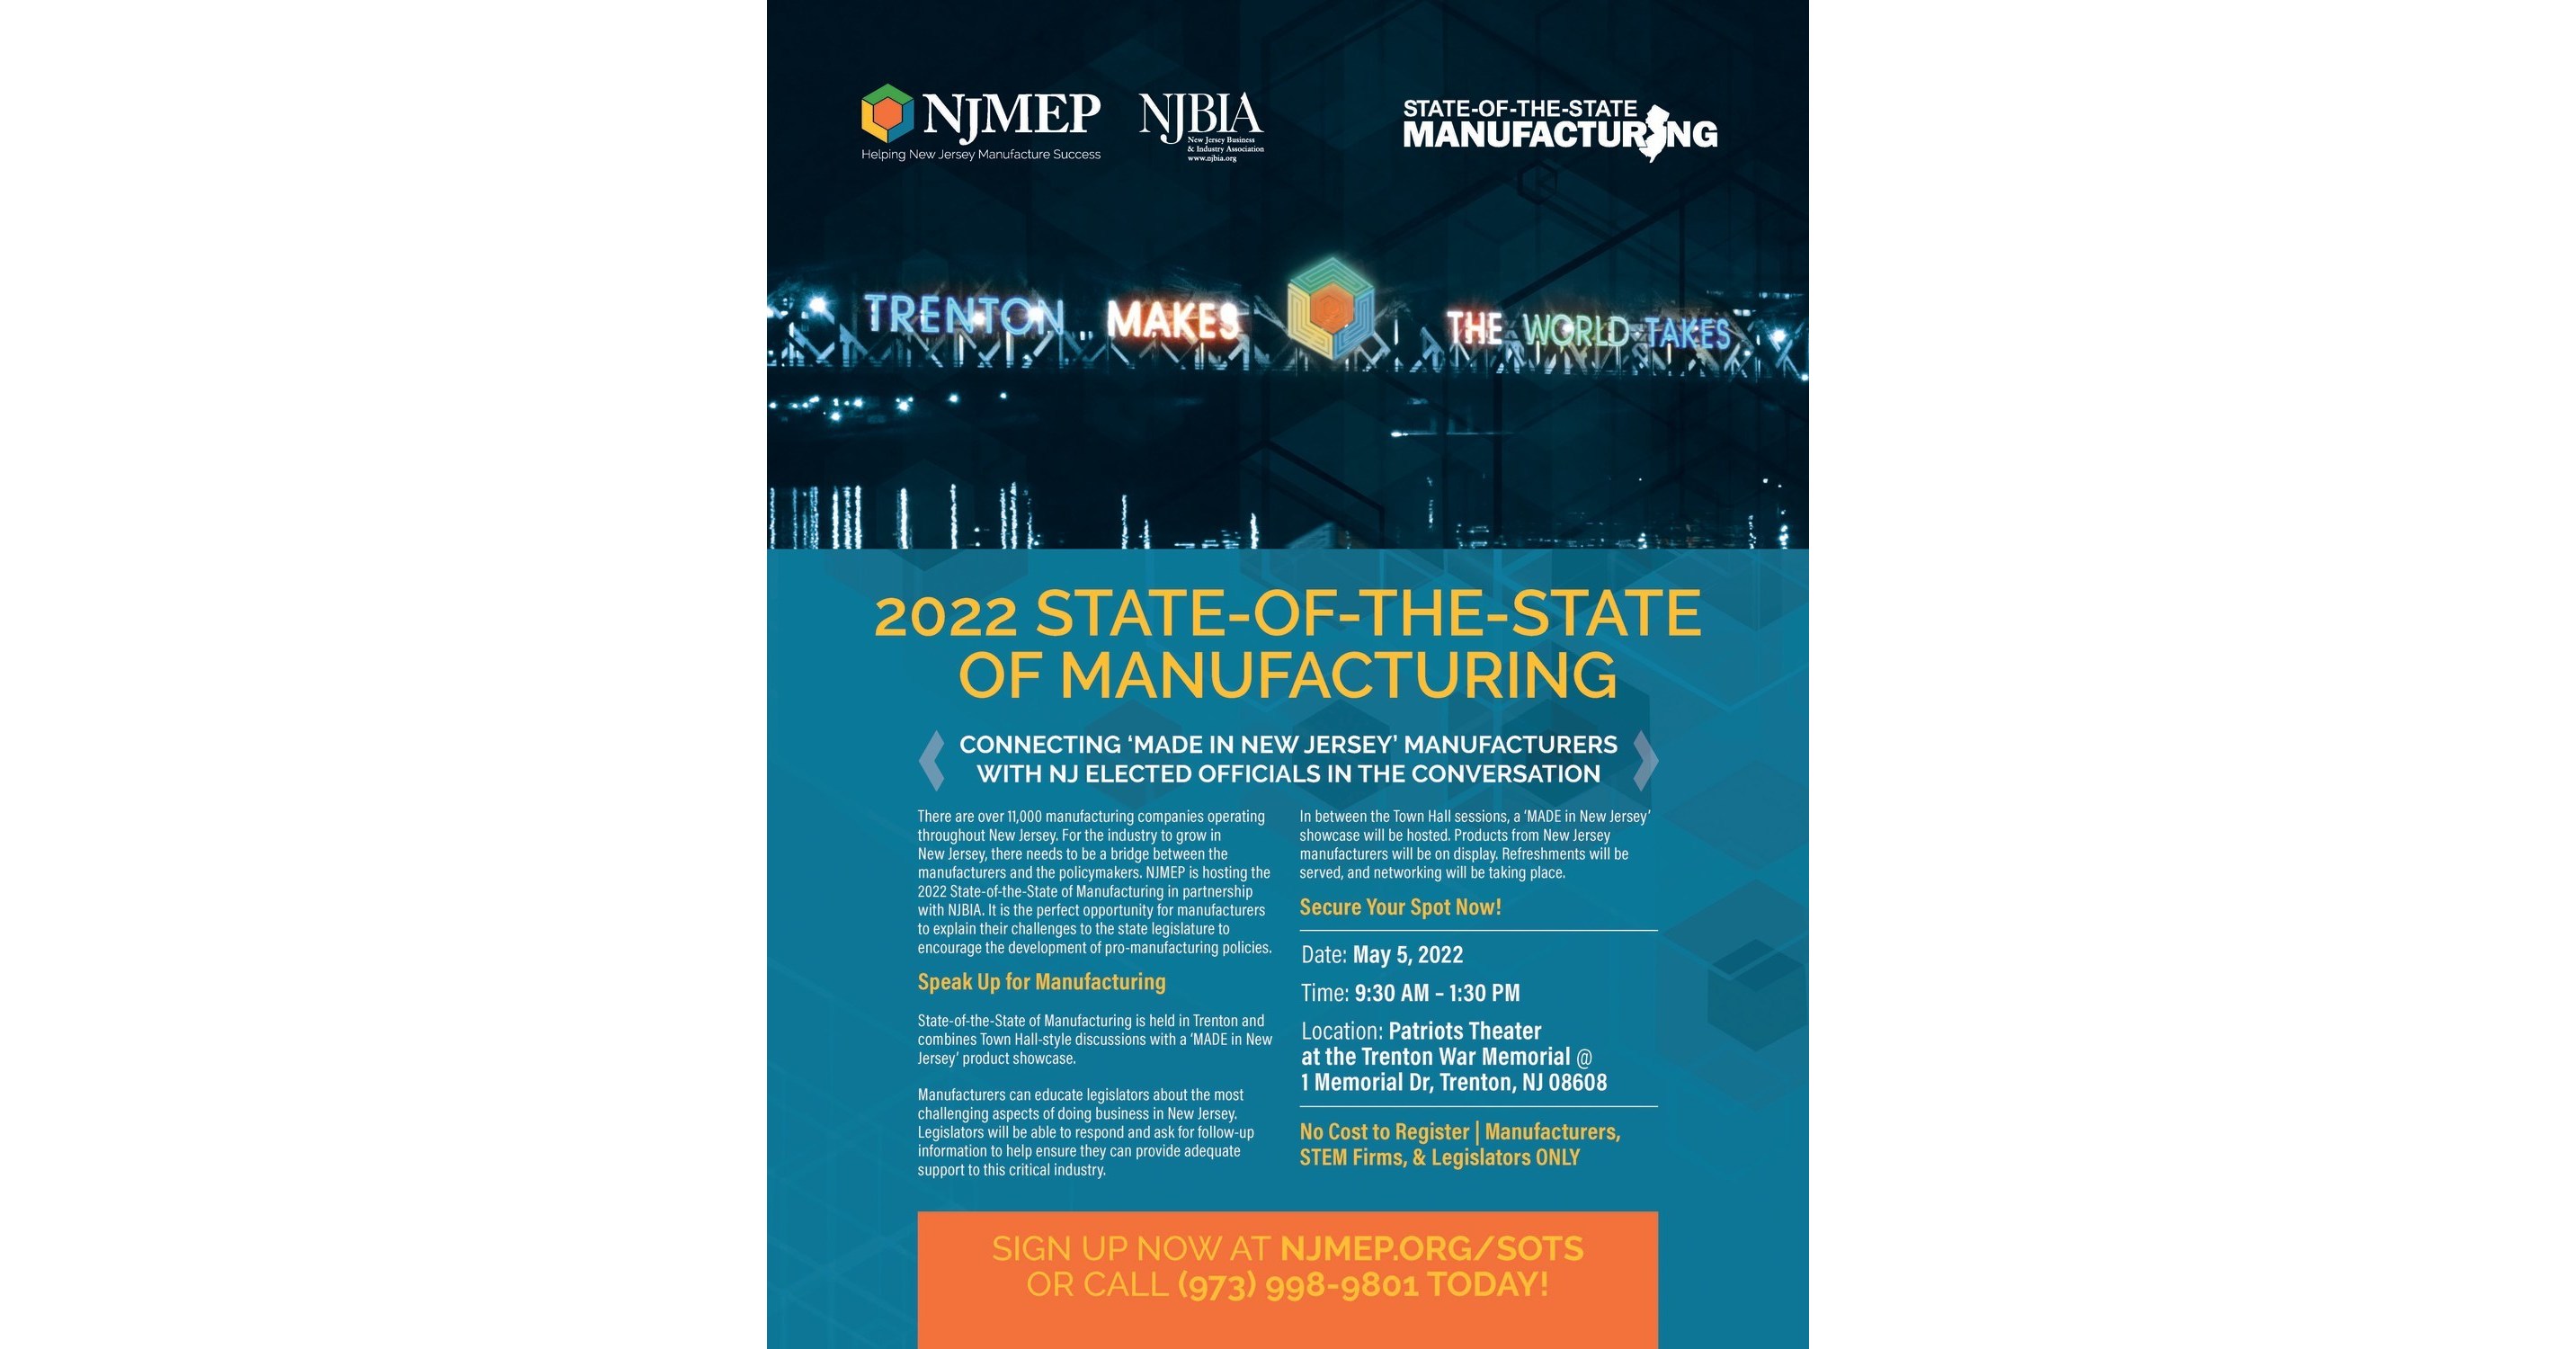 State-of-the-State of Manufacturing 2022 Creates a Bridge between Manufacturing Leaders and Policy Makers